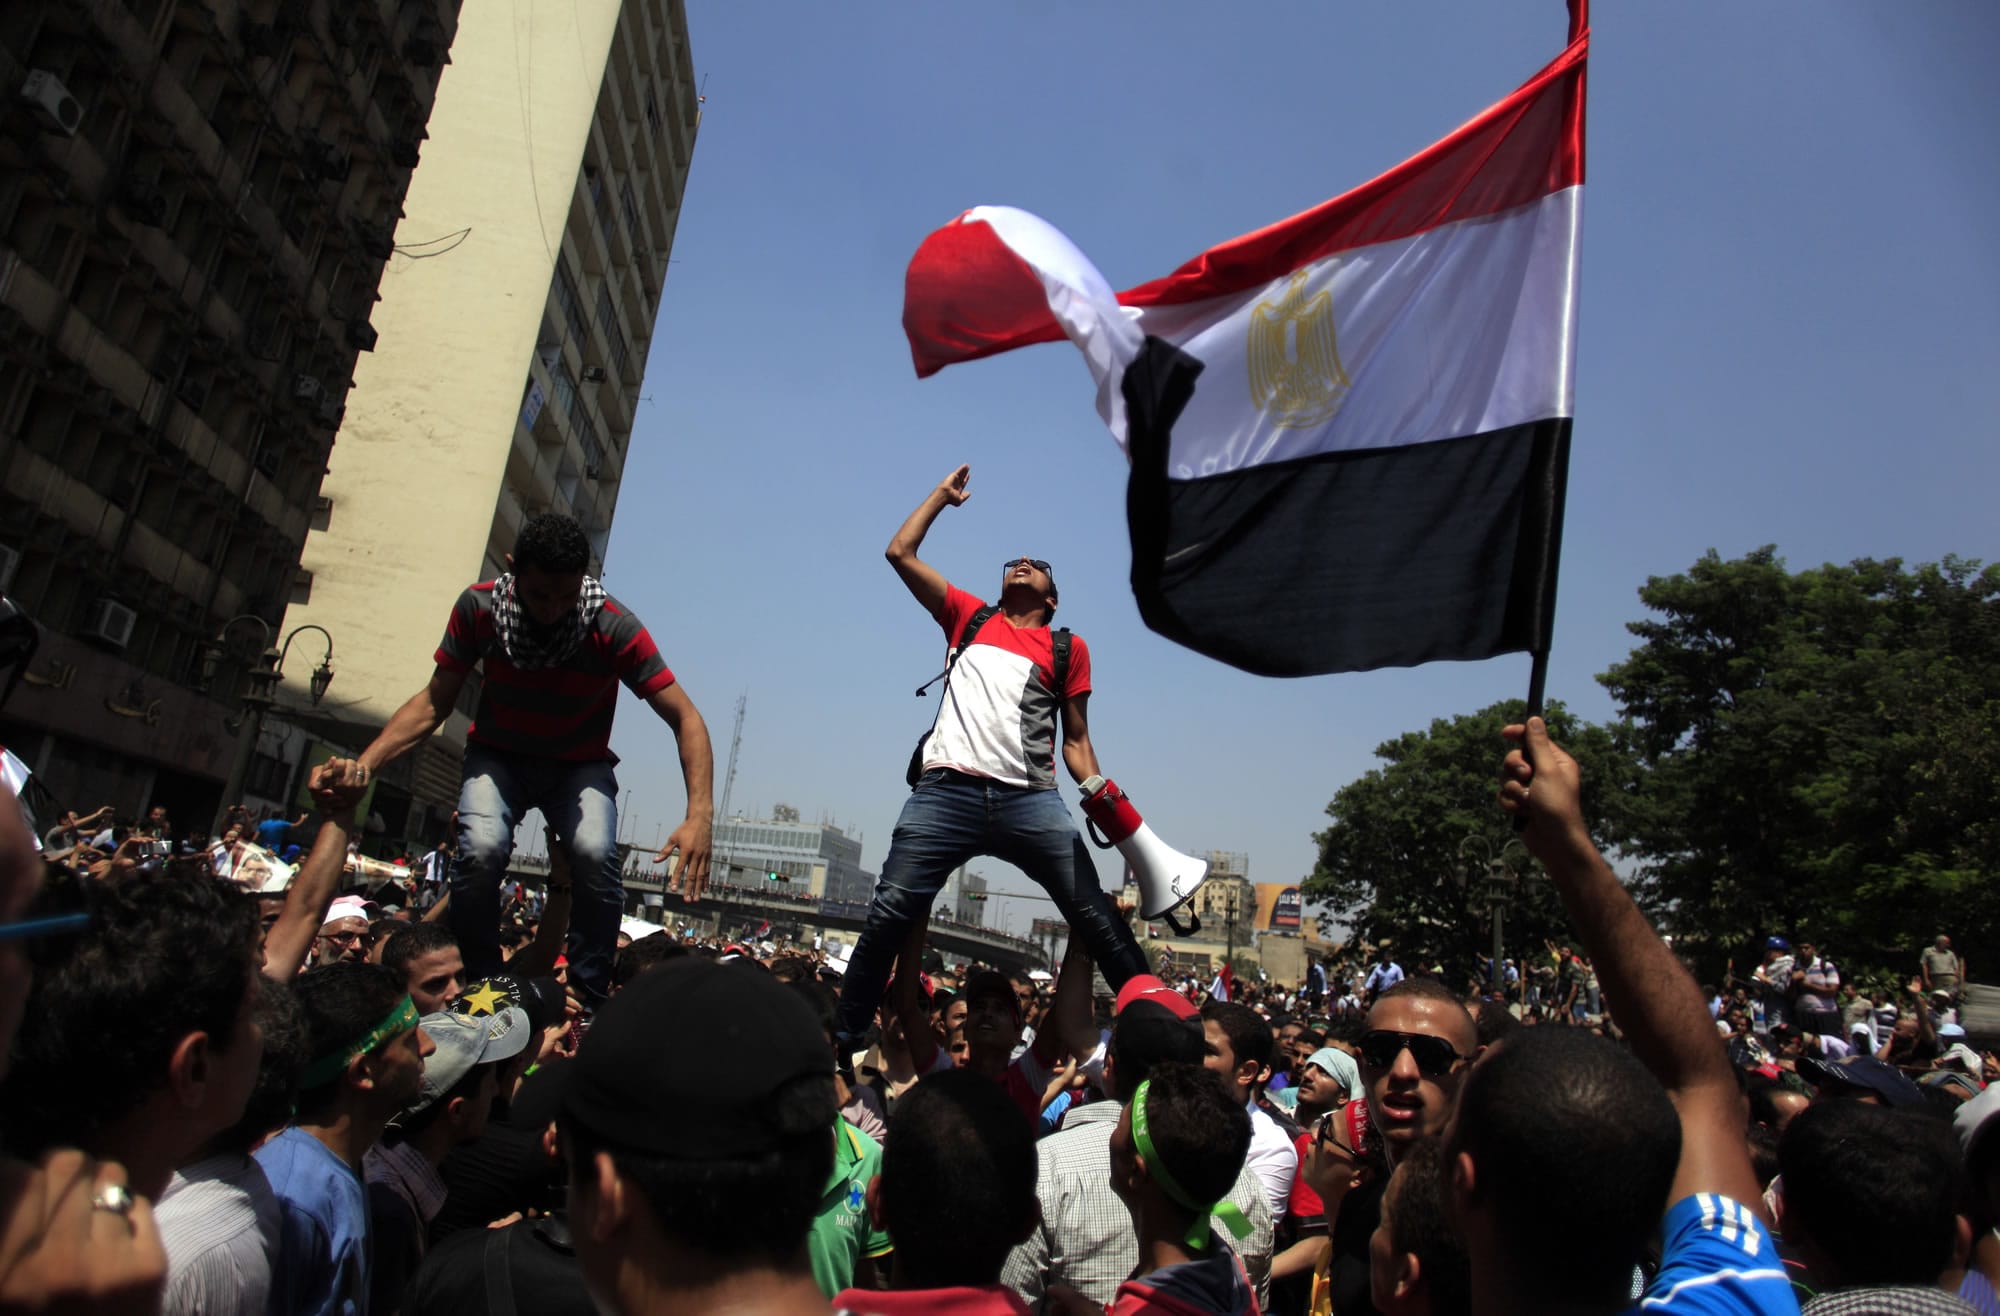 Supporters of Egypt's ousted President Mohammed Morsi chant slogans Friday during a protest in Ramses Square in downtown Cairo, Egypt. Heavy gunfire rang out Friday throughout Cairo as tens of thousands of Muslim Brotherhood supporters clashed with vigilante residents in the fiercest street battles to engulf the capital since the country's Arab Spring uprising.